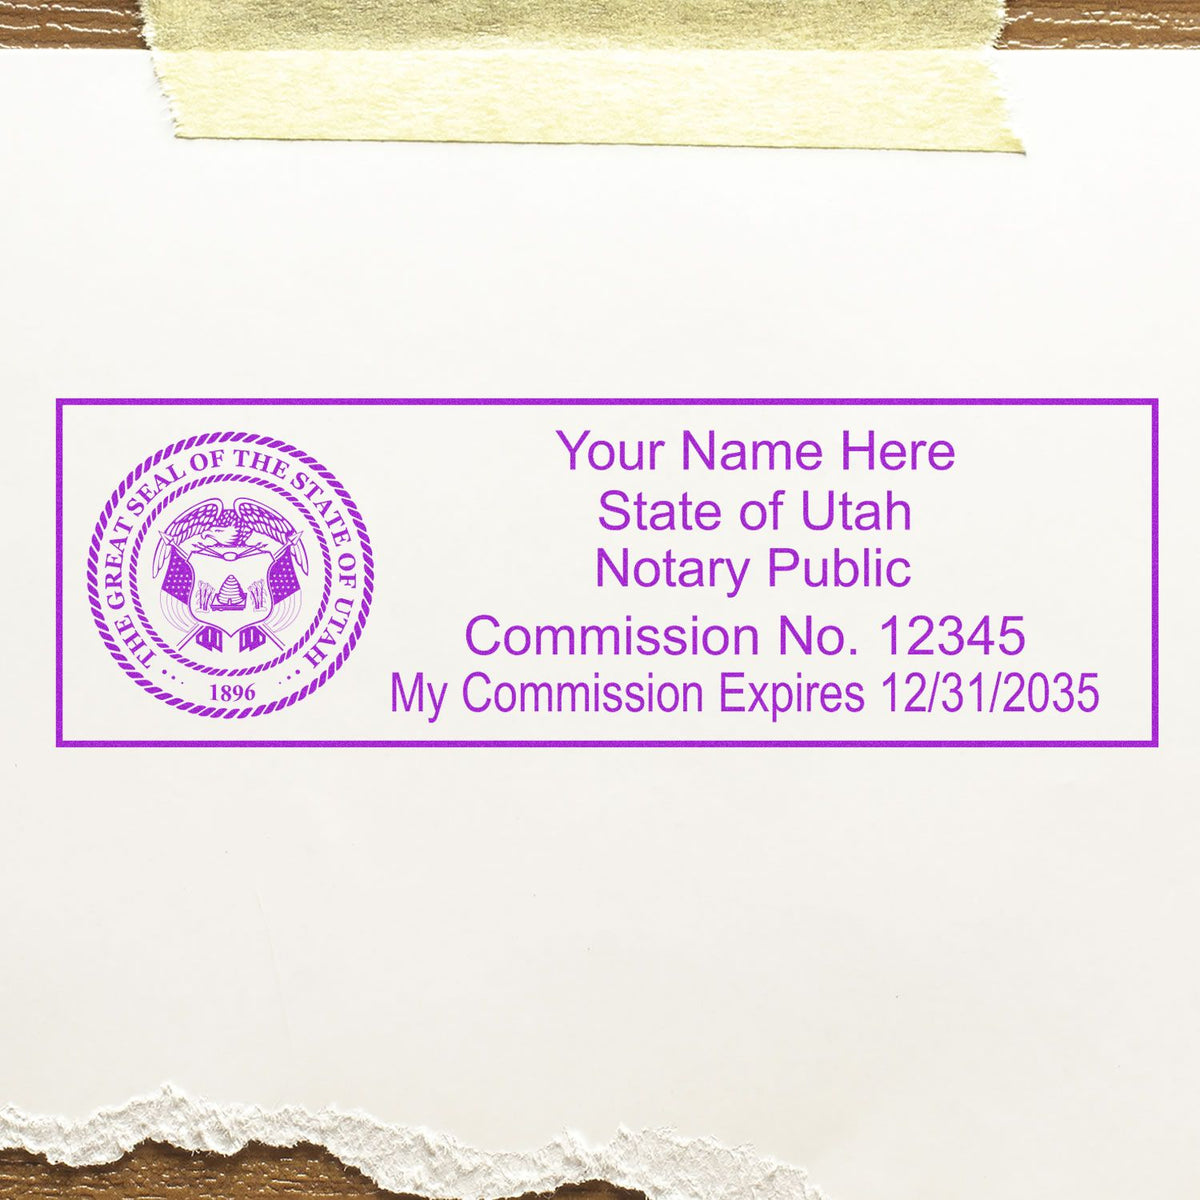 An alternative view of the MaxLight Premium Pre-Inked Utah State Seal Notarial Stamp stamped on a sheet of paper showing the image in use